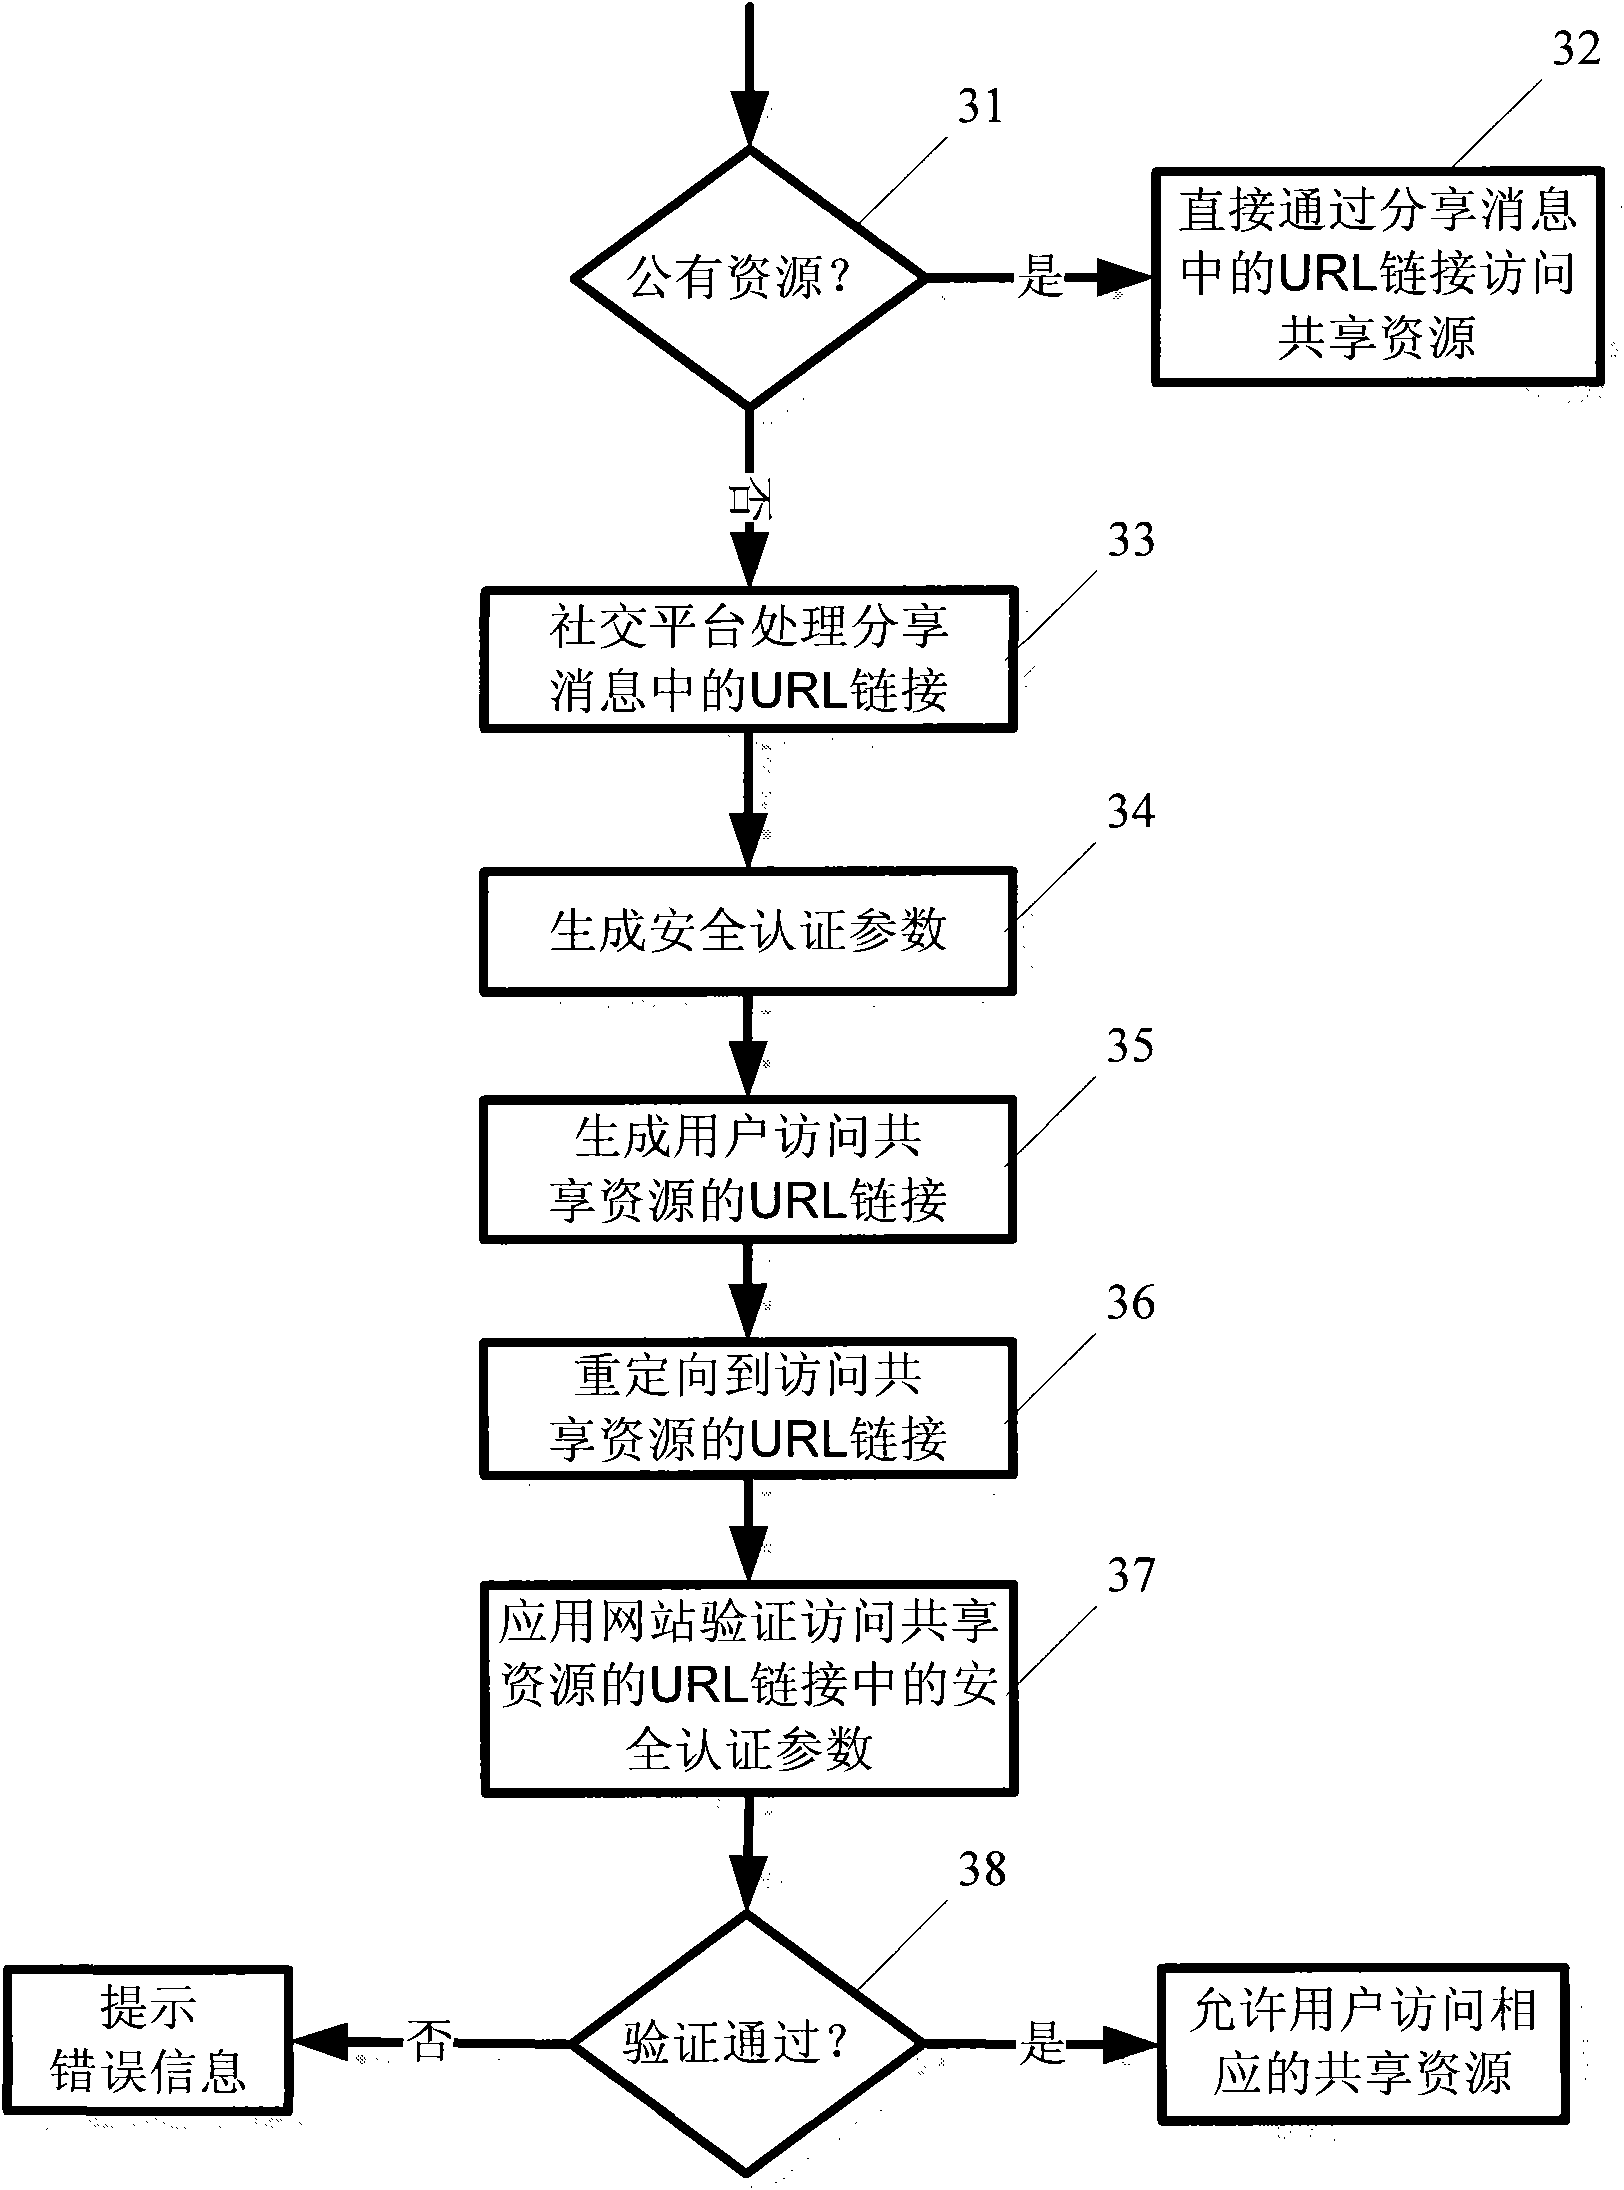 Method, device and system for realizing resource sharing